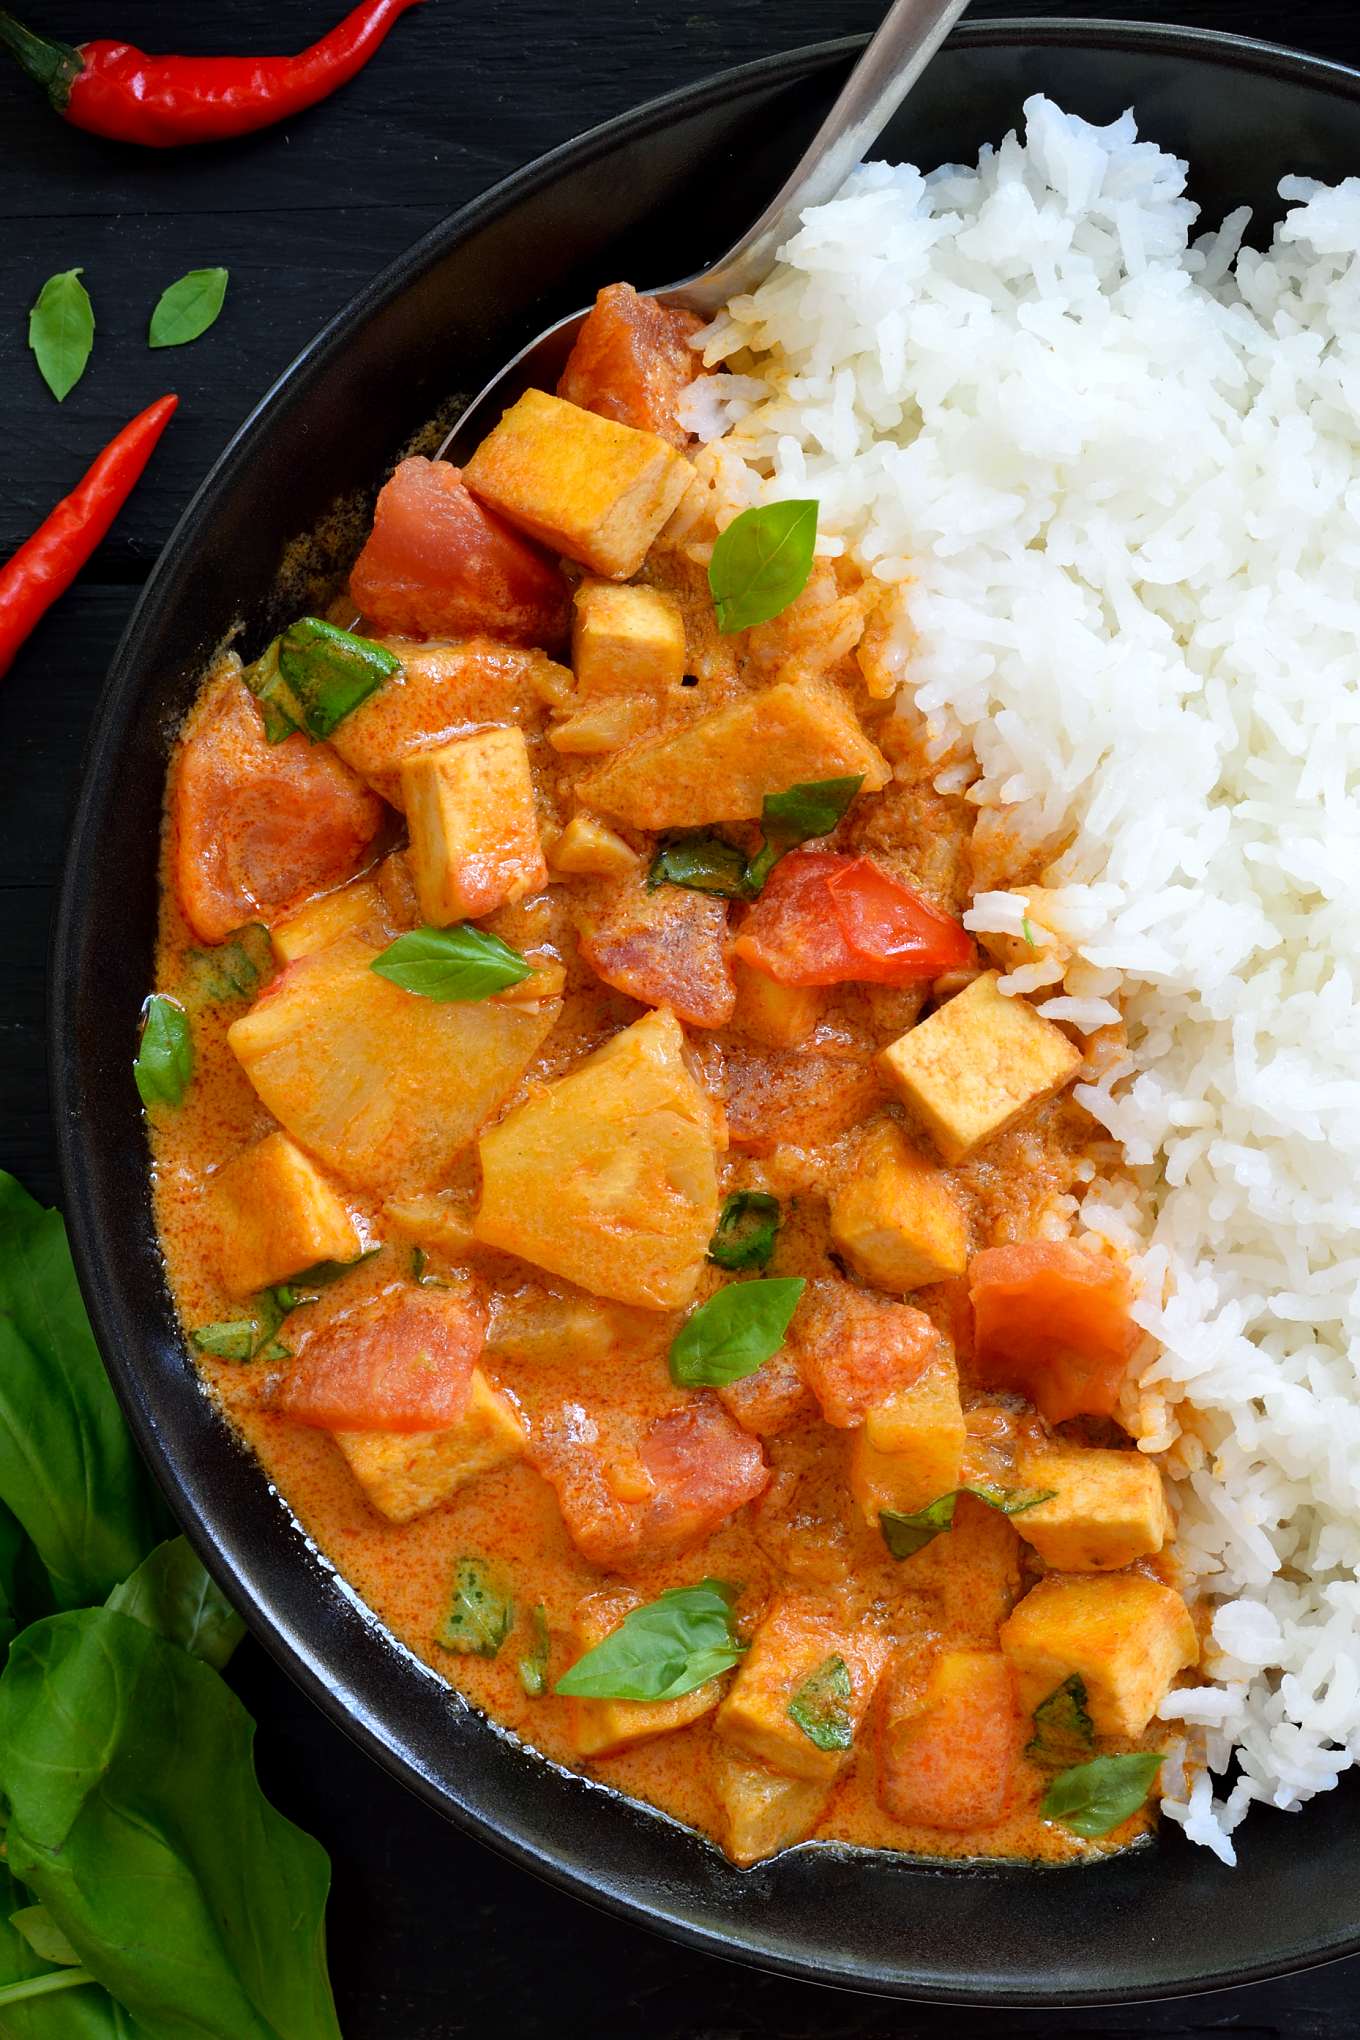 This recipe for vegan Thai curry is a quick and easy, healthy and delicious lunch or dinner idea. Fresh tomatoes, sweet pineapple and protein-packed tofu are served up in a creamy coconut milk sauce flavoured with red curry paste. Add as much or as little chili as you want. This vegan Thai curry will be on the table in less than thirty minutes! 